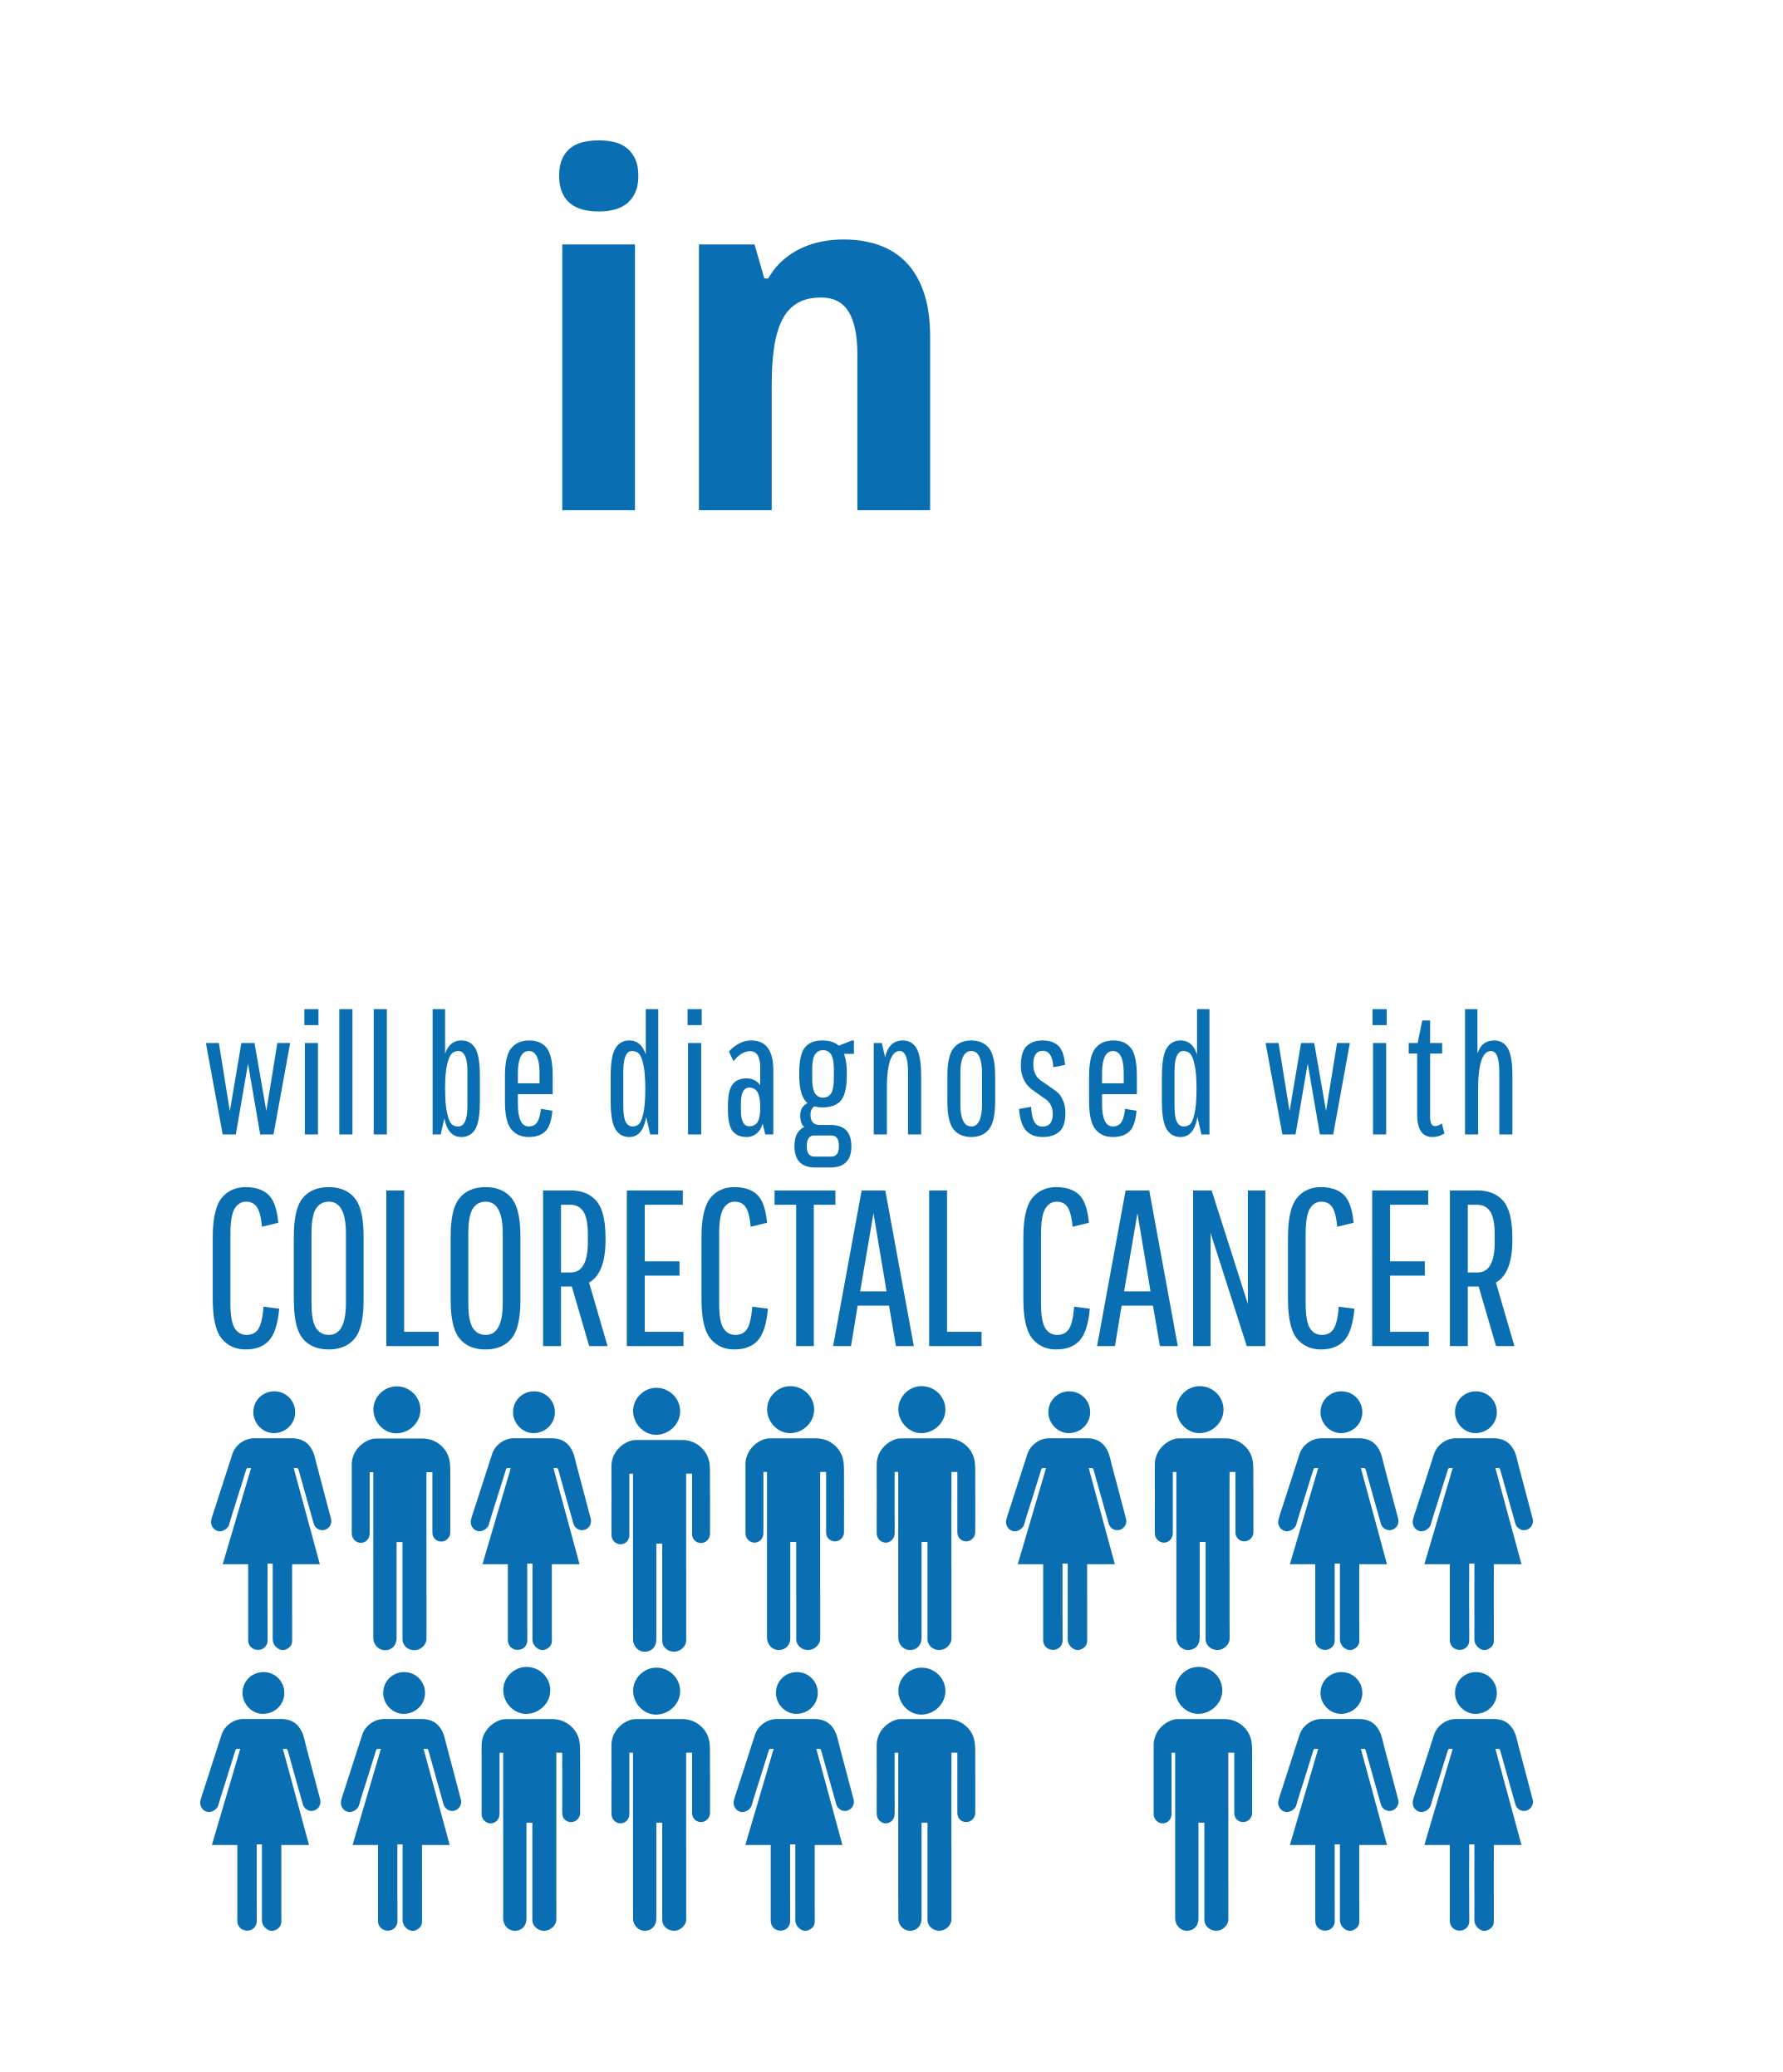 Colorectal Cancer infographic, 1 in 20 people will be diagnosed with colorectal cancer